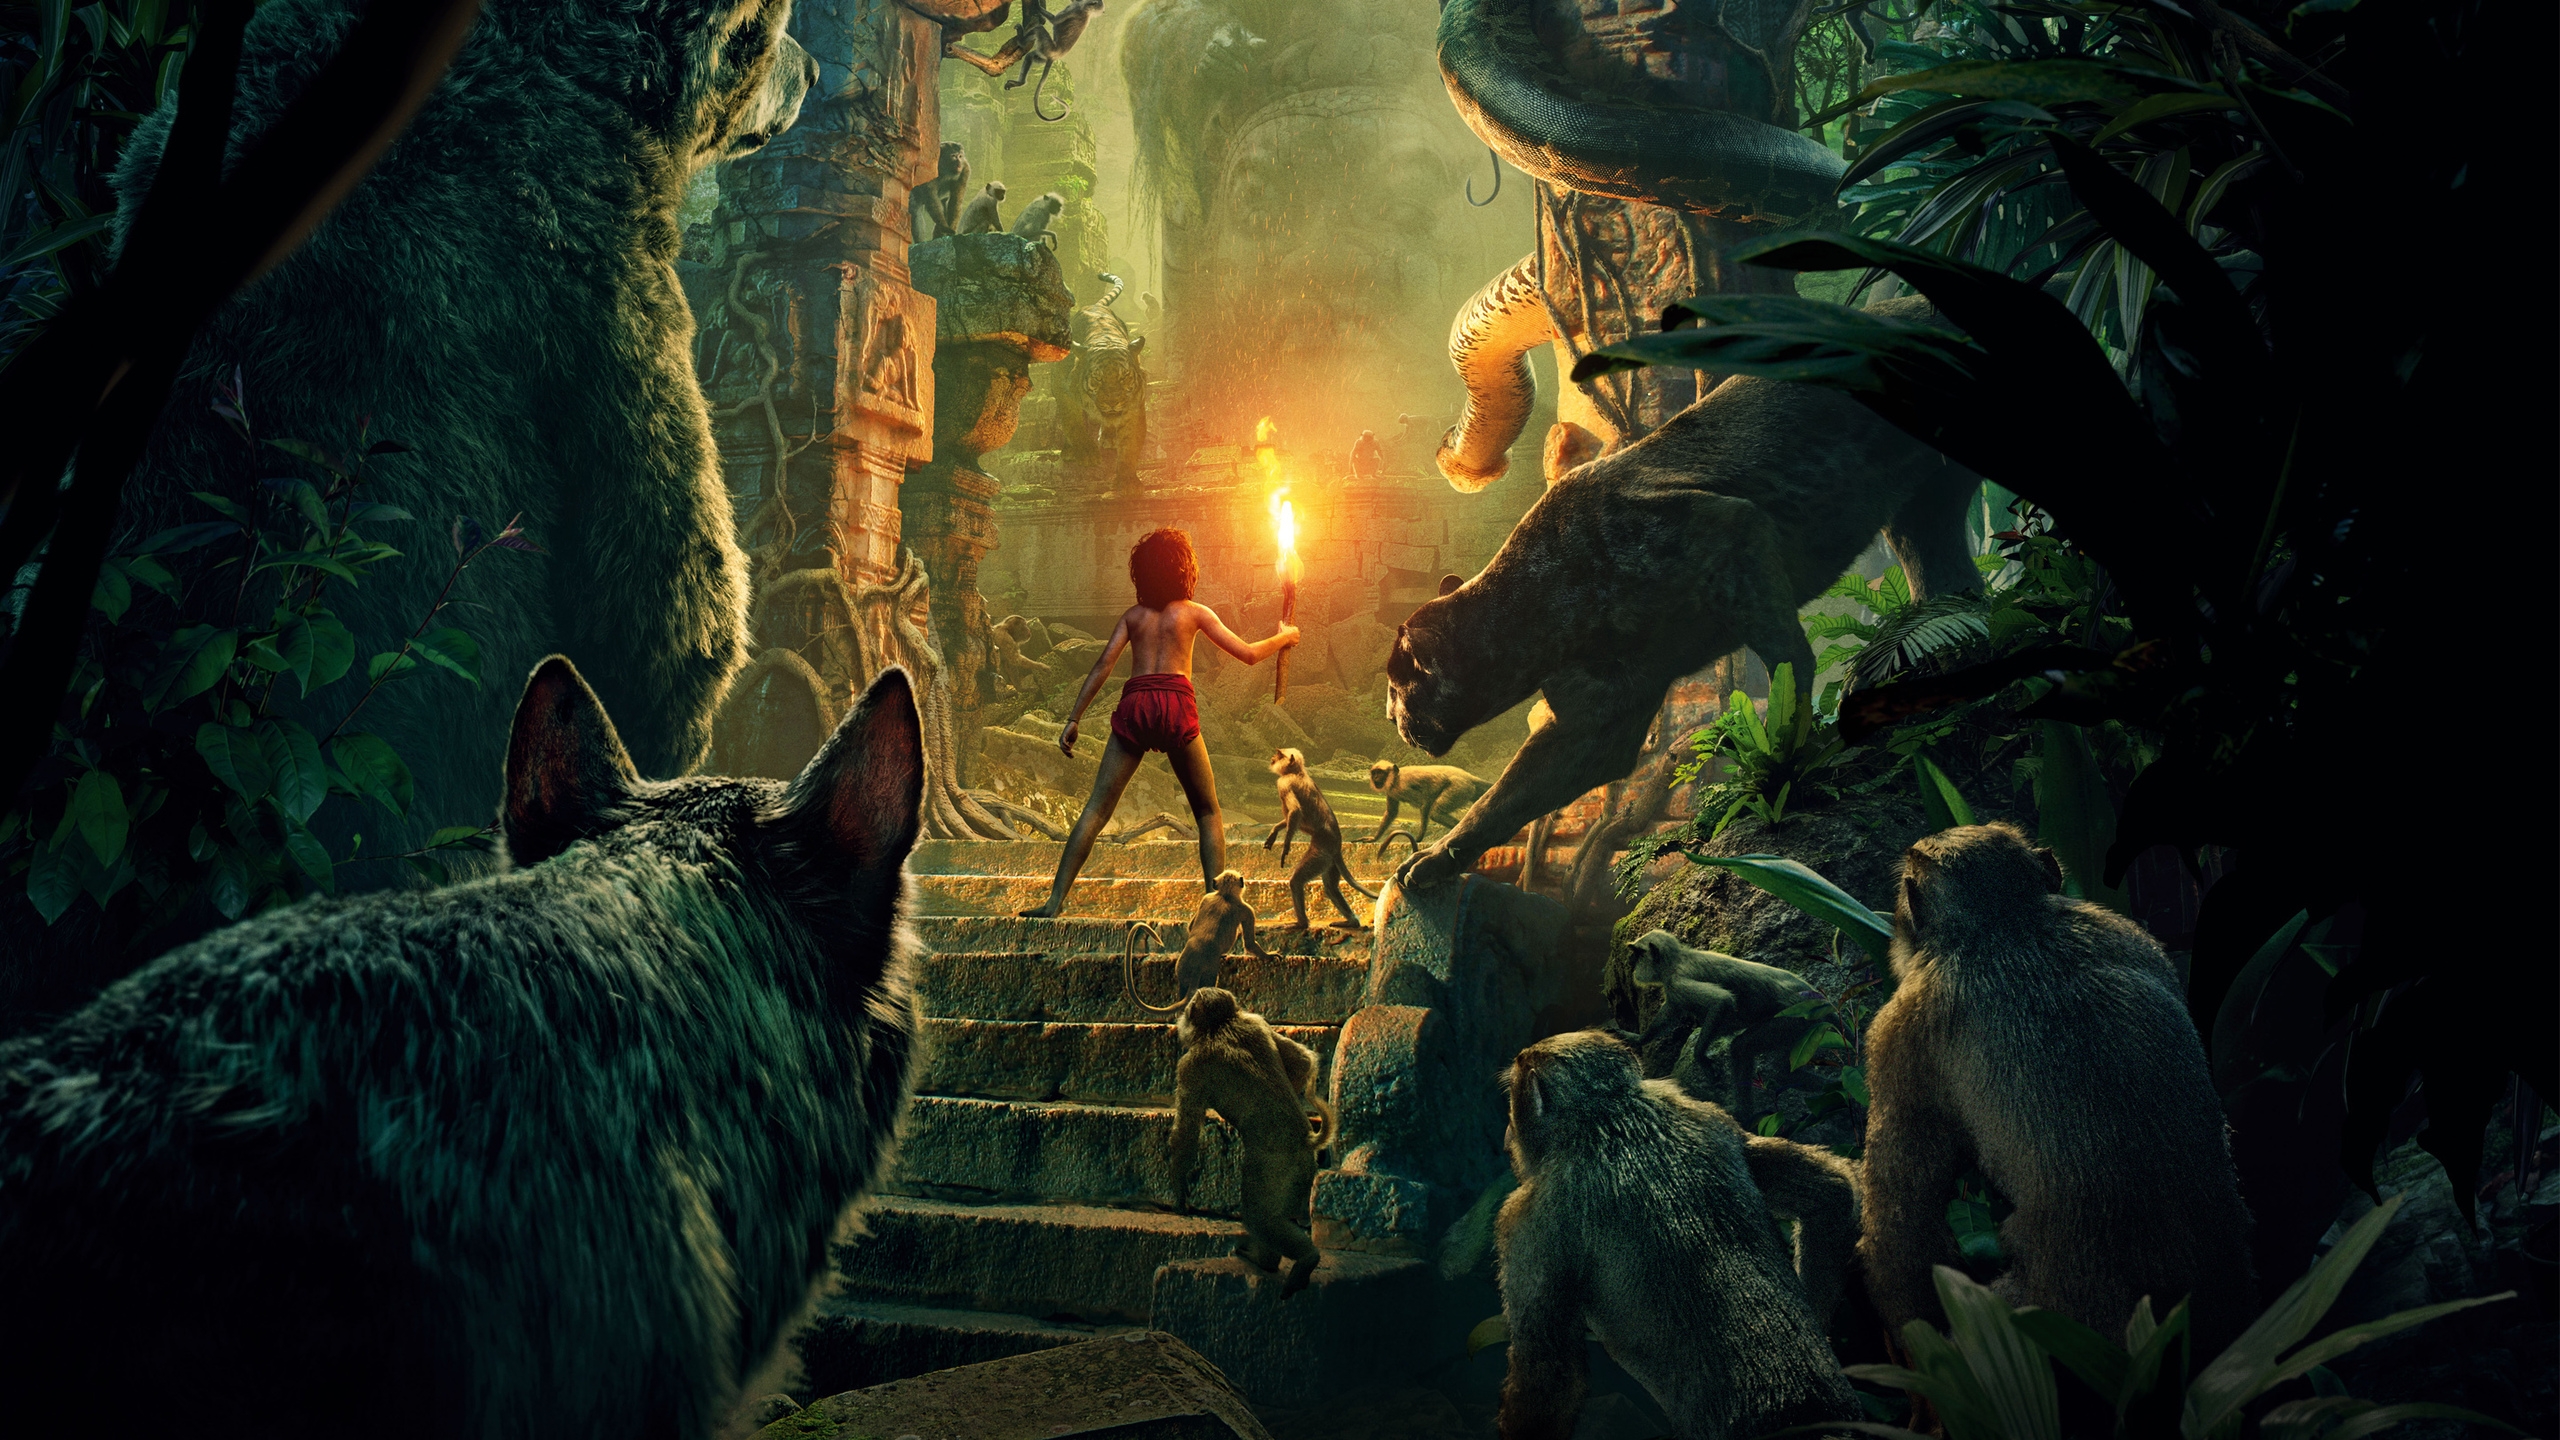 The Jungle Book 2016 for 2560x1440 HDTV resolution